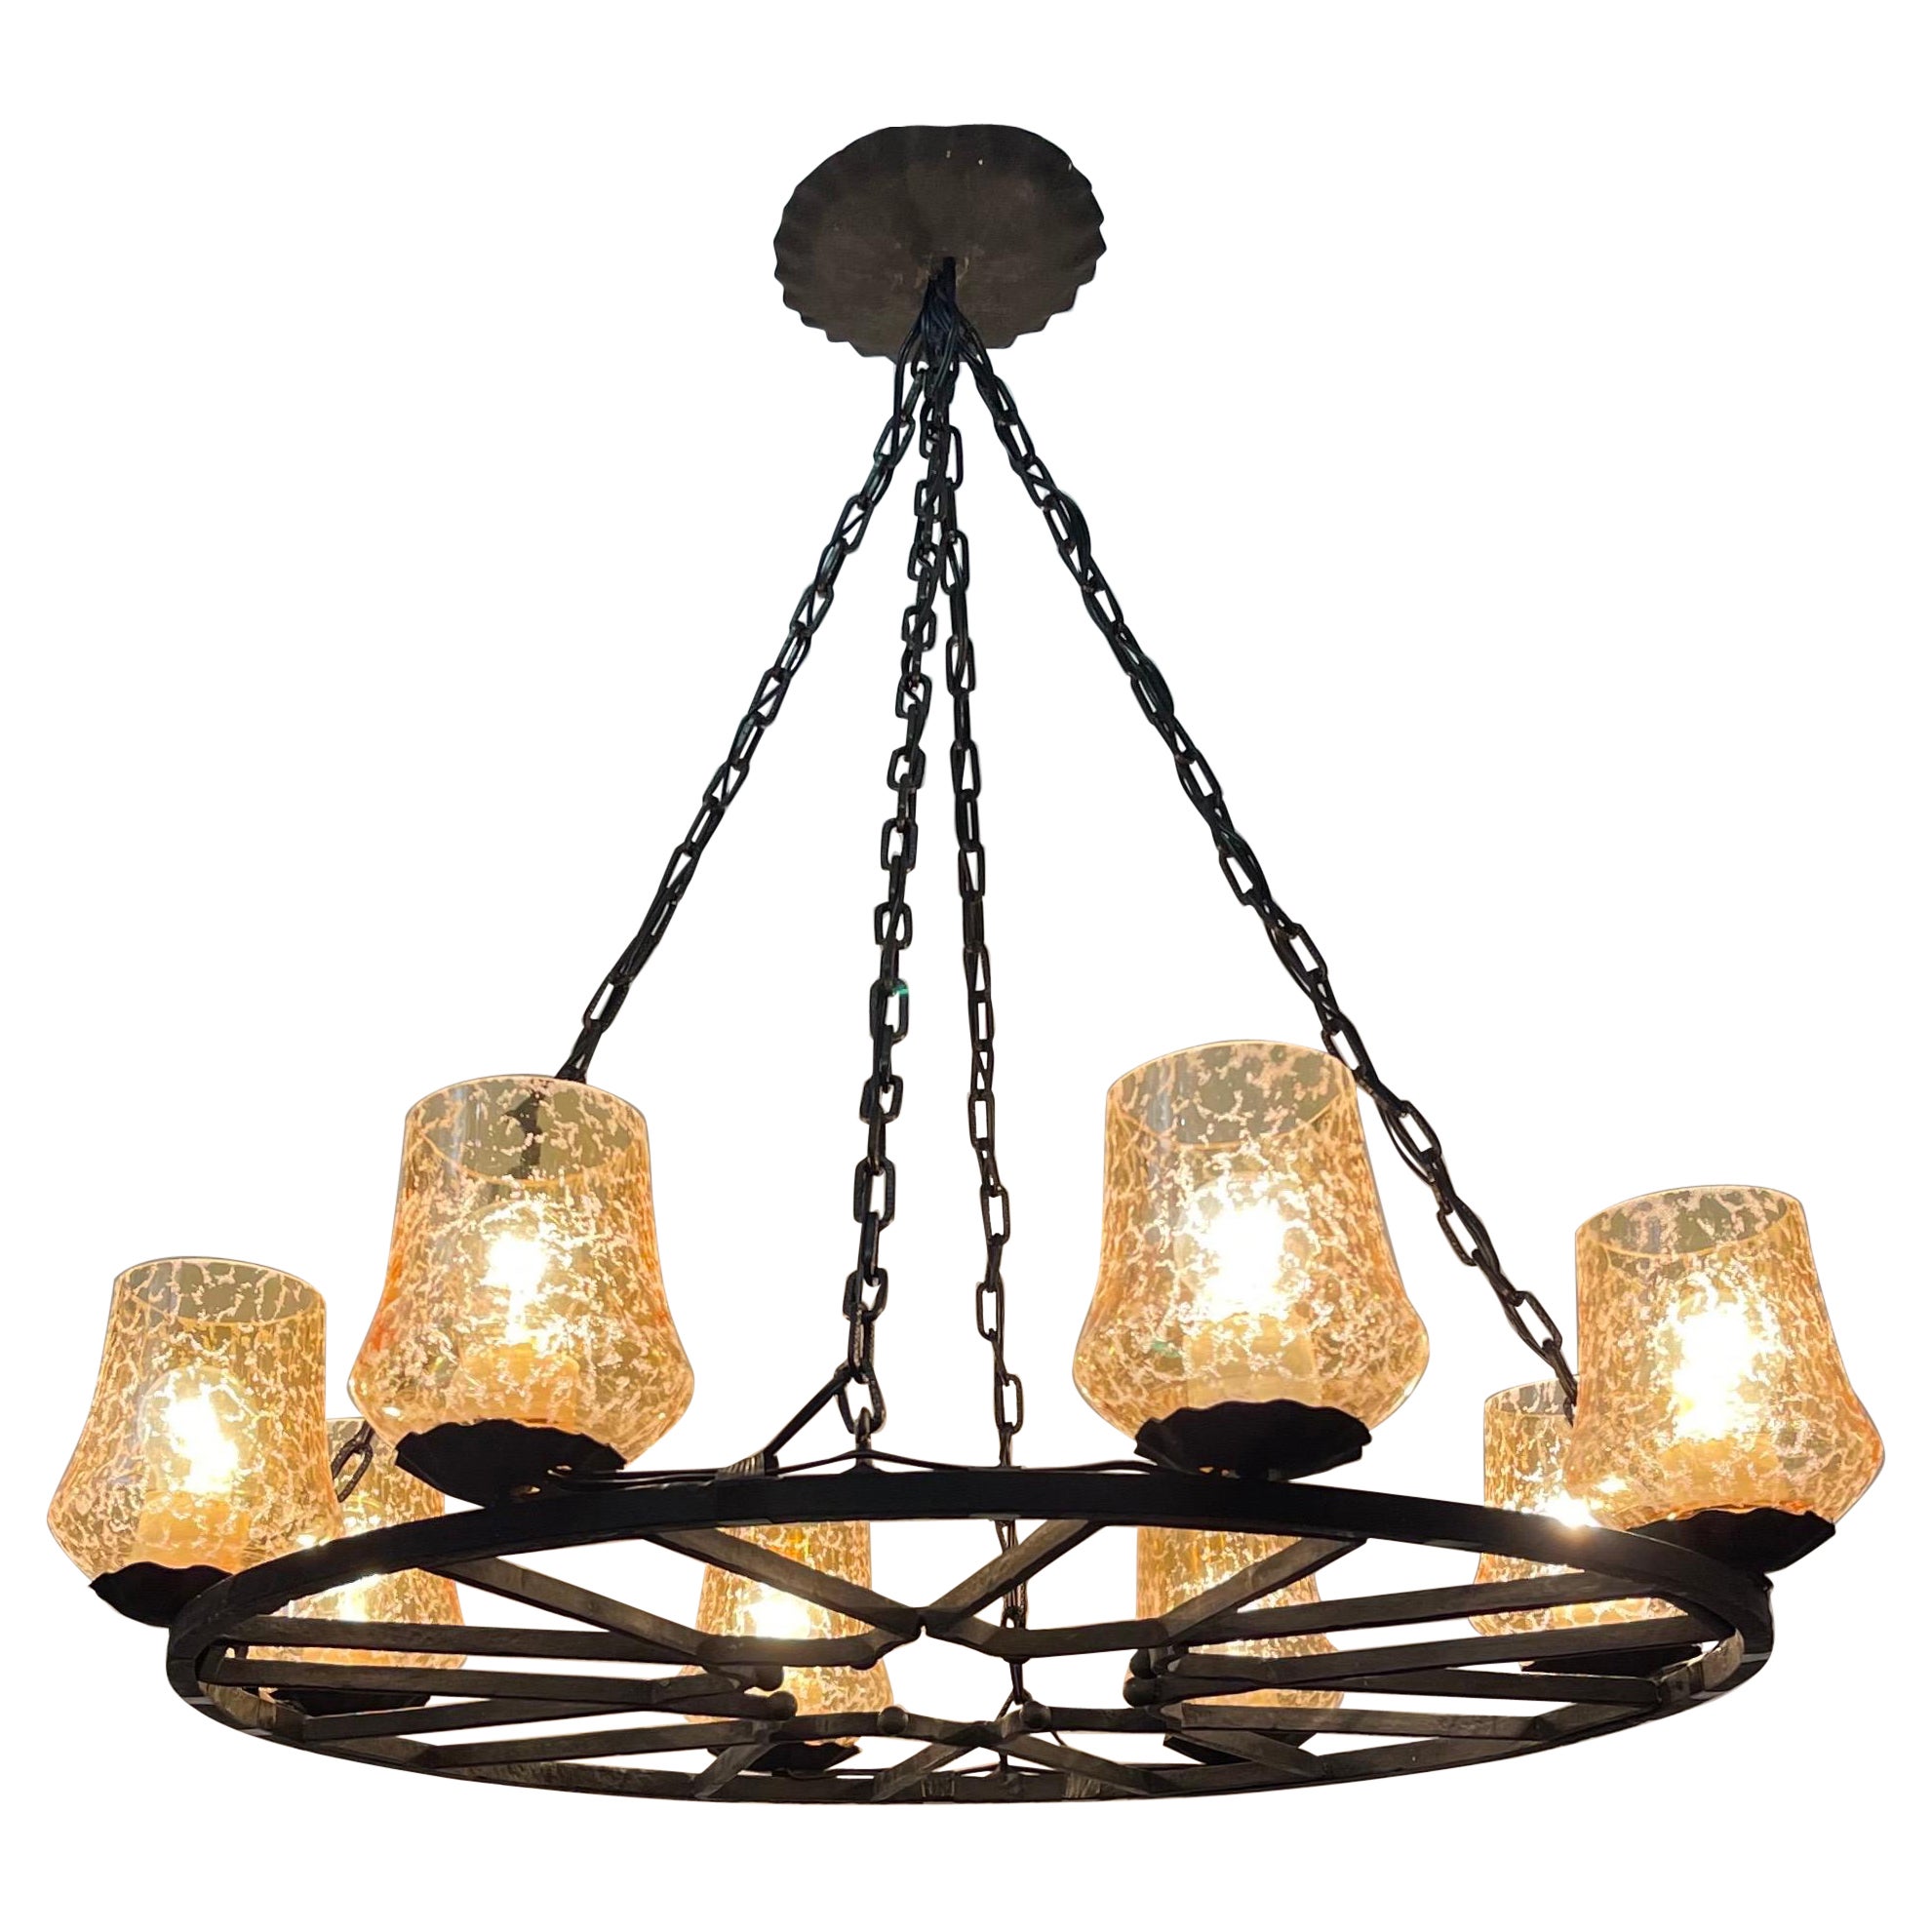 French Wrought Iron and Amber Glass Chandelier, circa 1950s